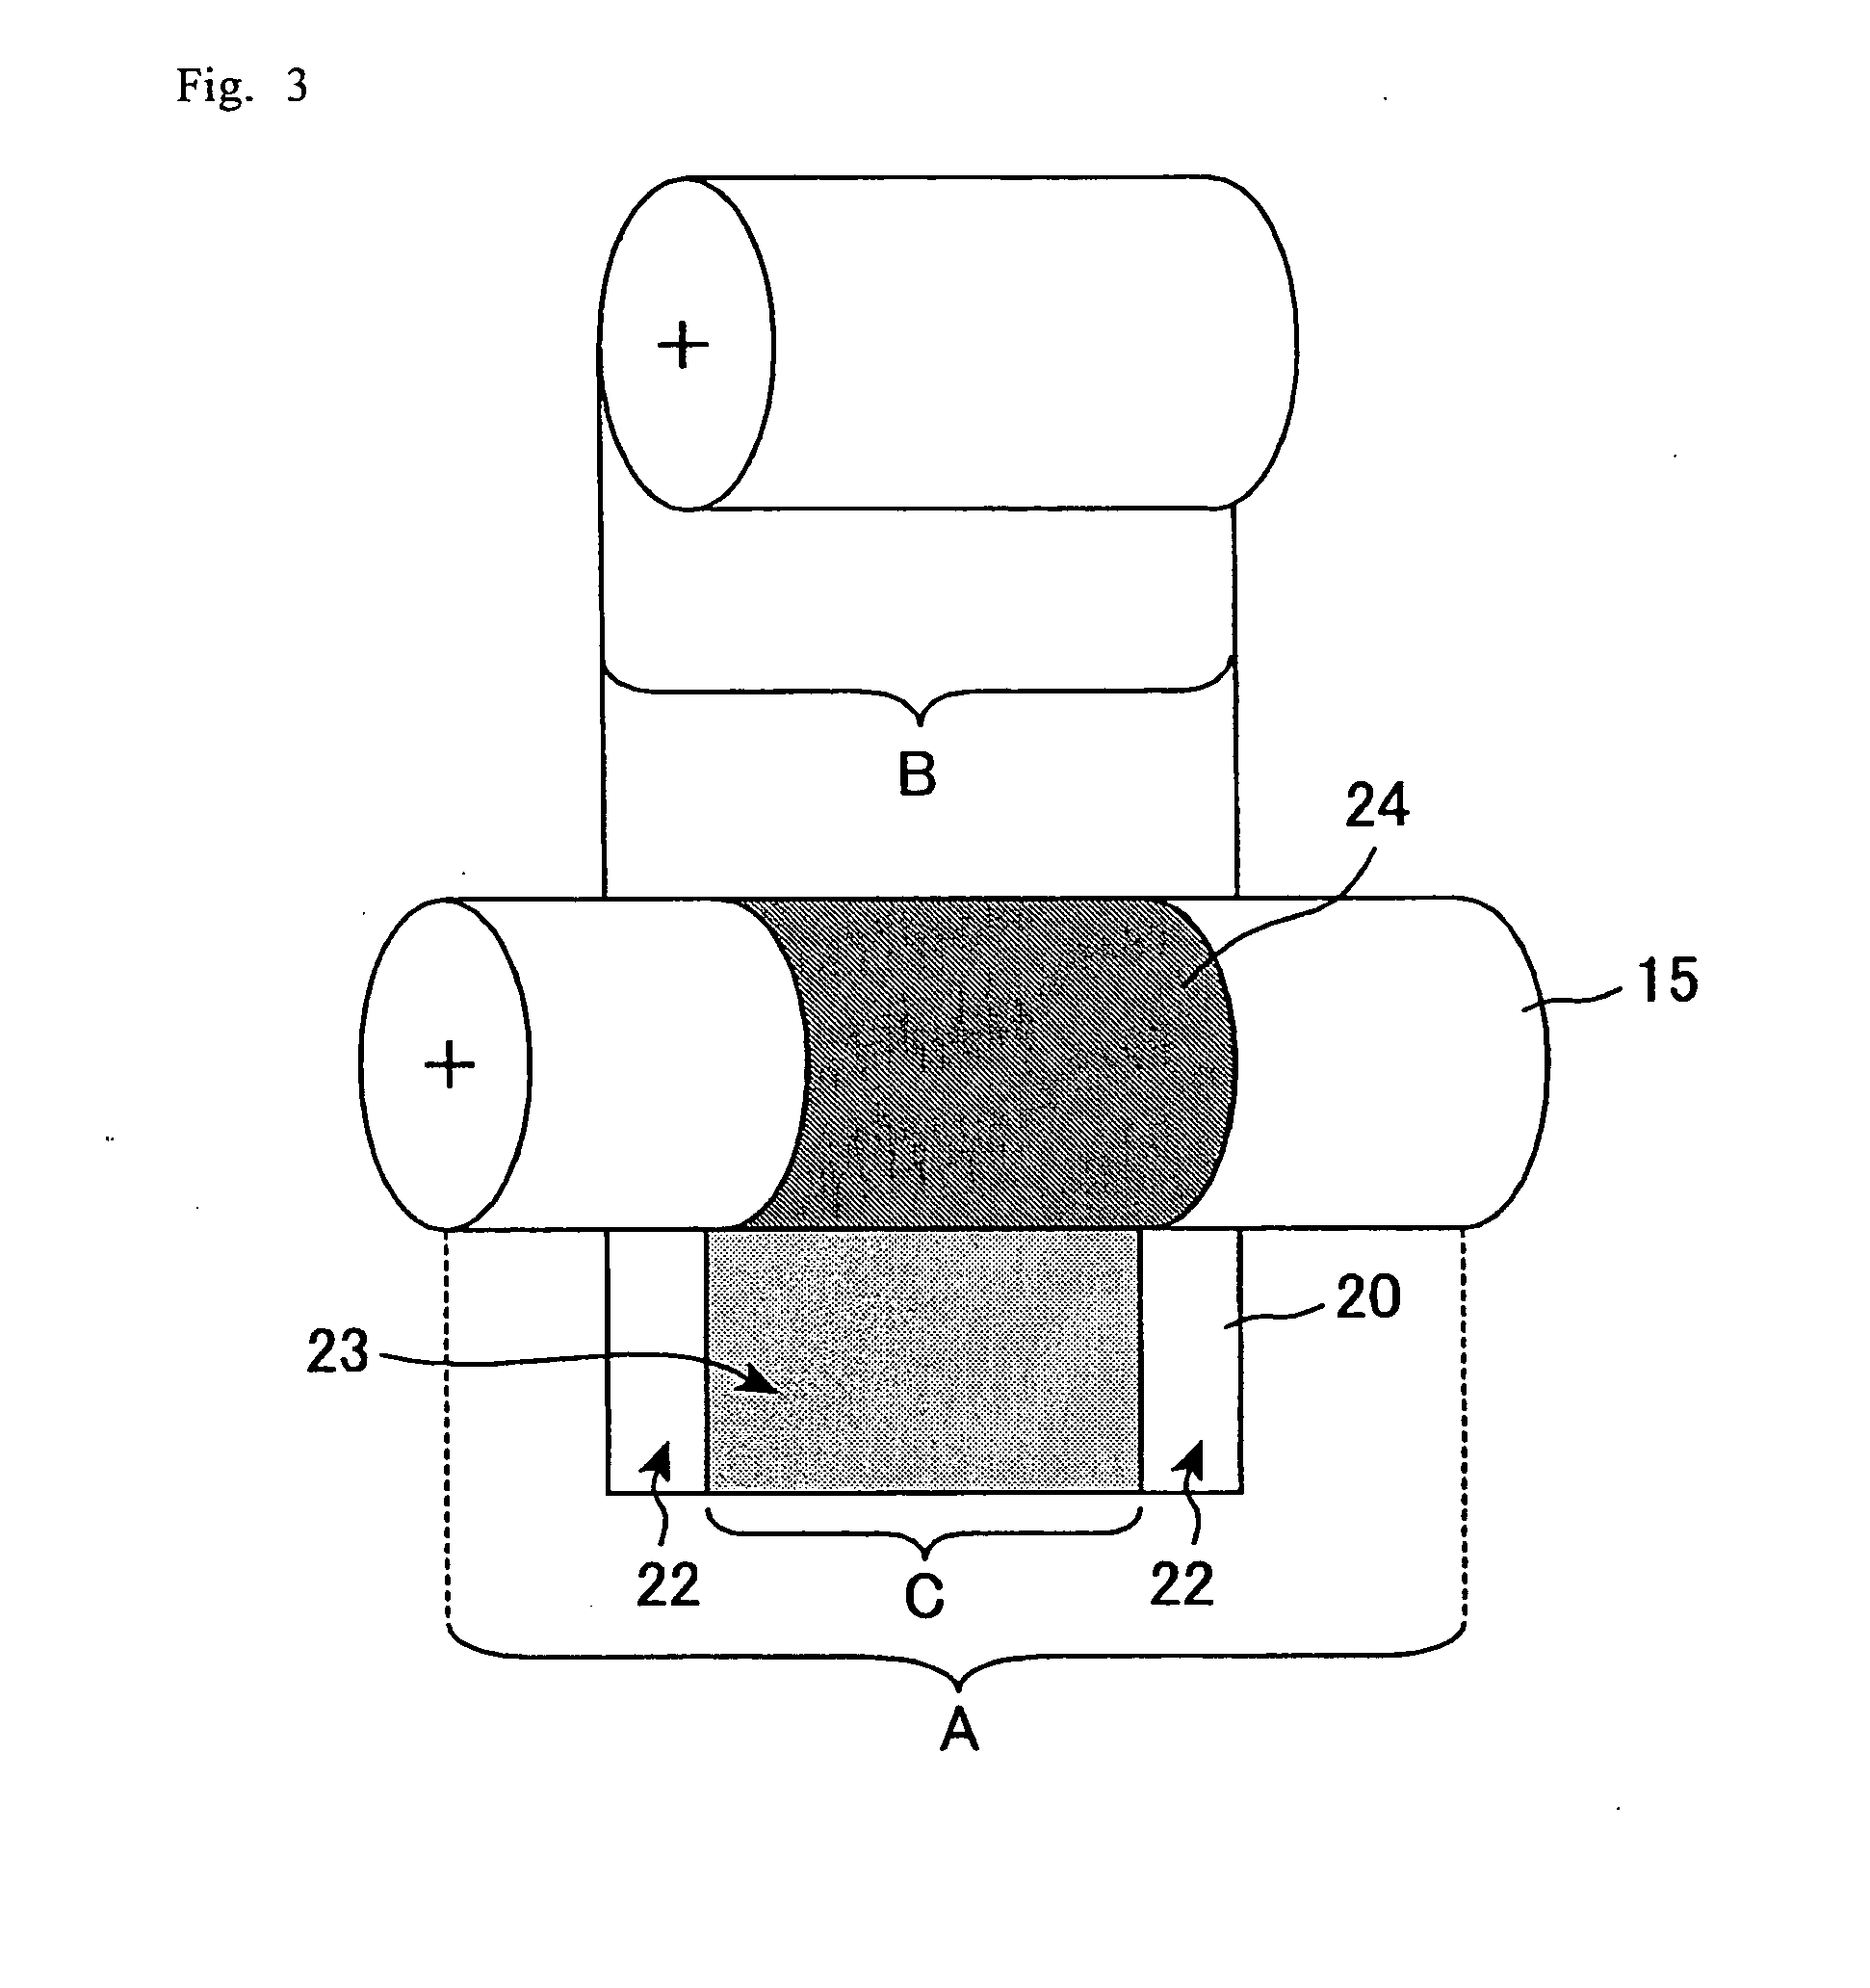 Optical element, roller type nanoprinting apparatus, and process for producing die roll